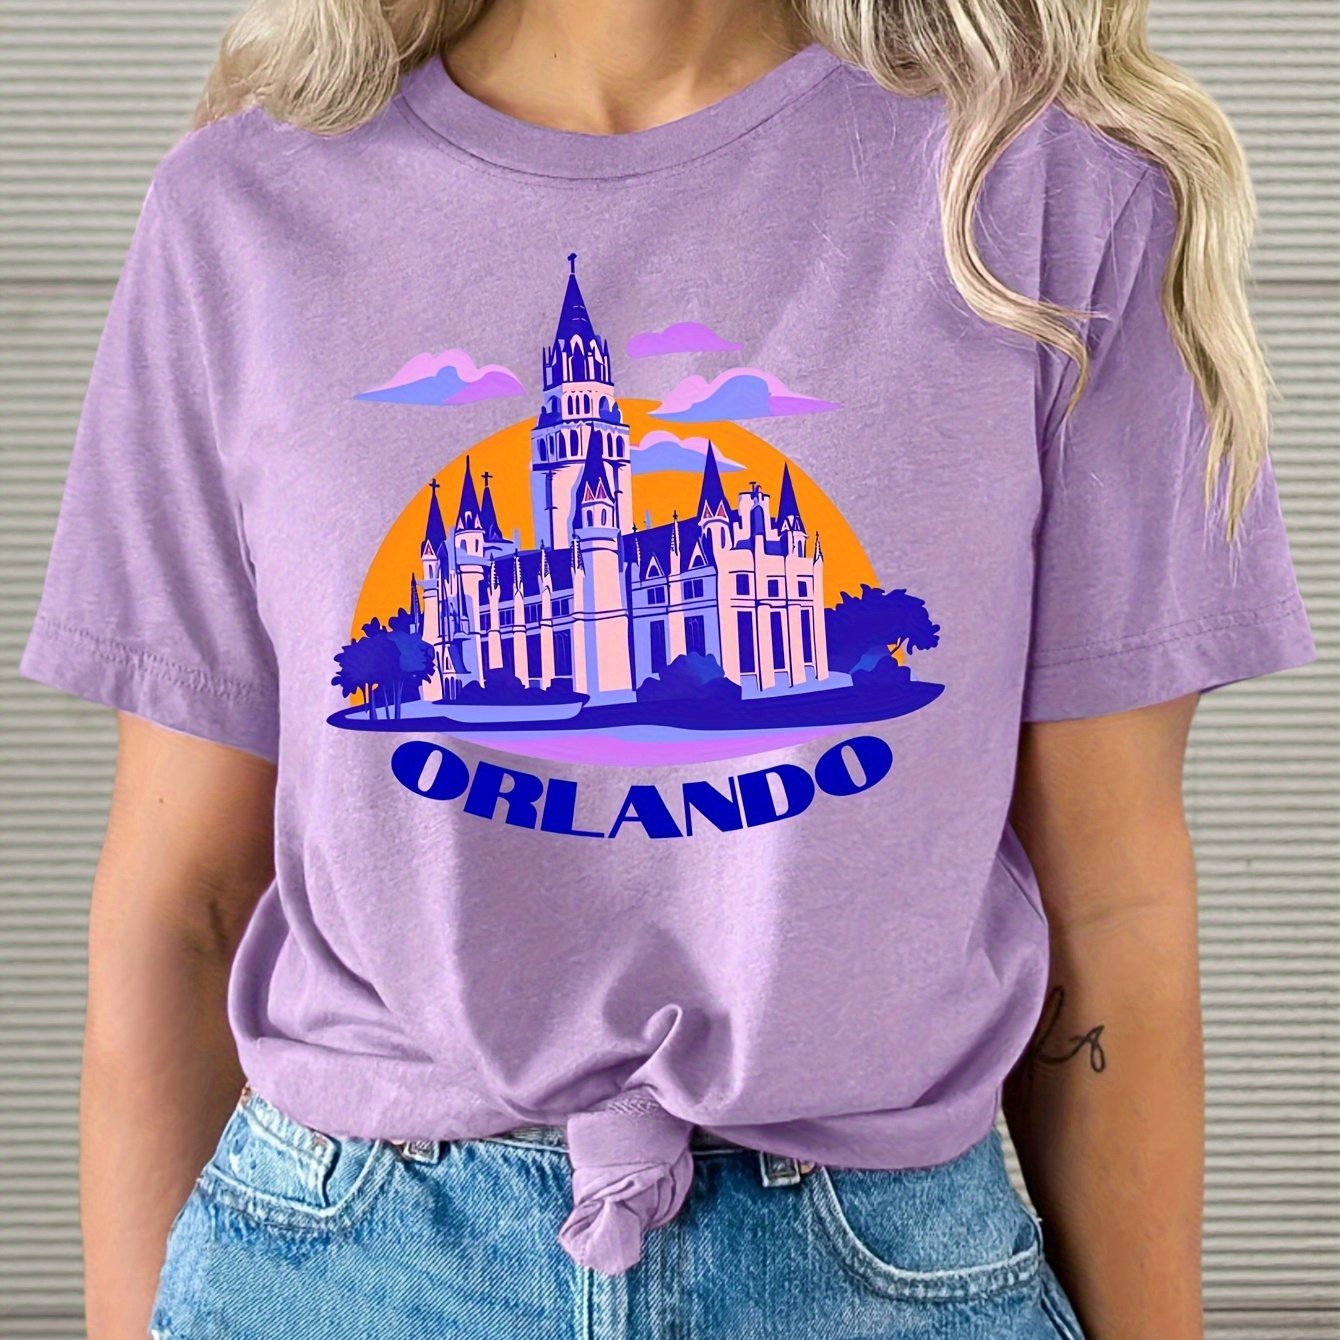 

Orlando & Building Print Crew Neck T-shirt, Casual Short Sleeve Top For Summer & Spring, Women's Clothing